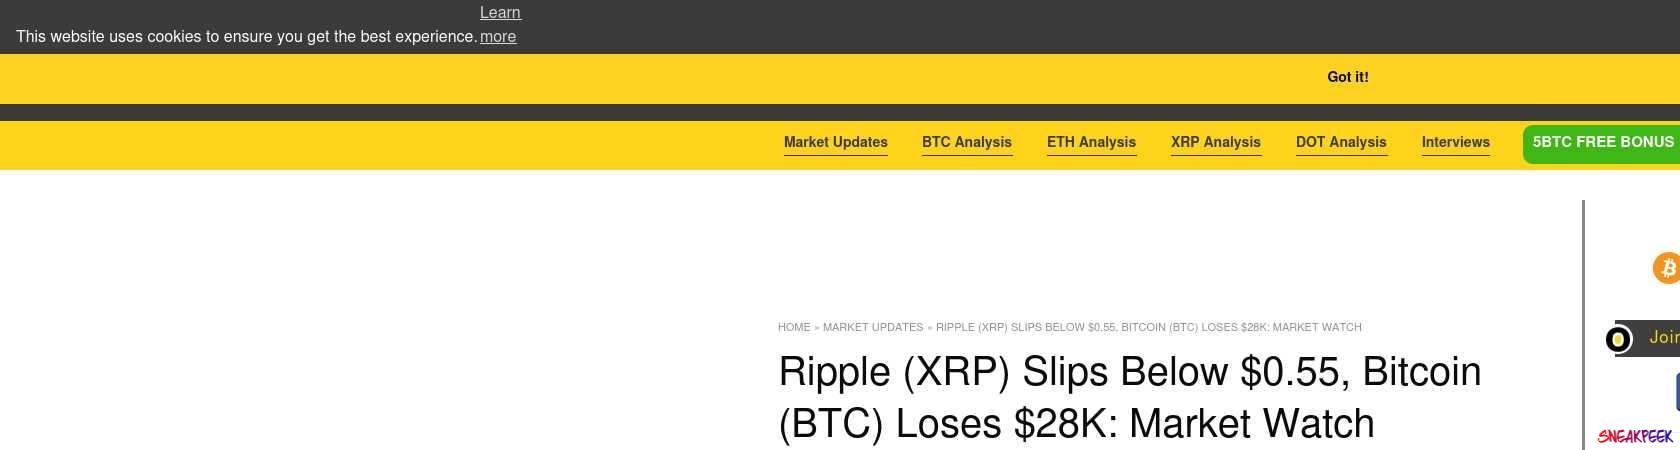 Read the full Article:  ⭲ Ripple (XRP) Slips Below $0.55, Bitcoin (BTC) Loses $28K: Market Watch